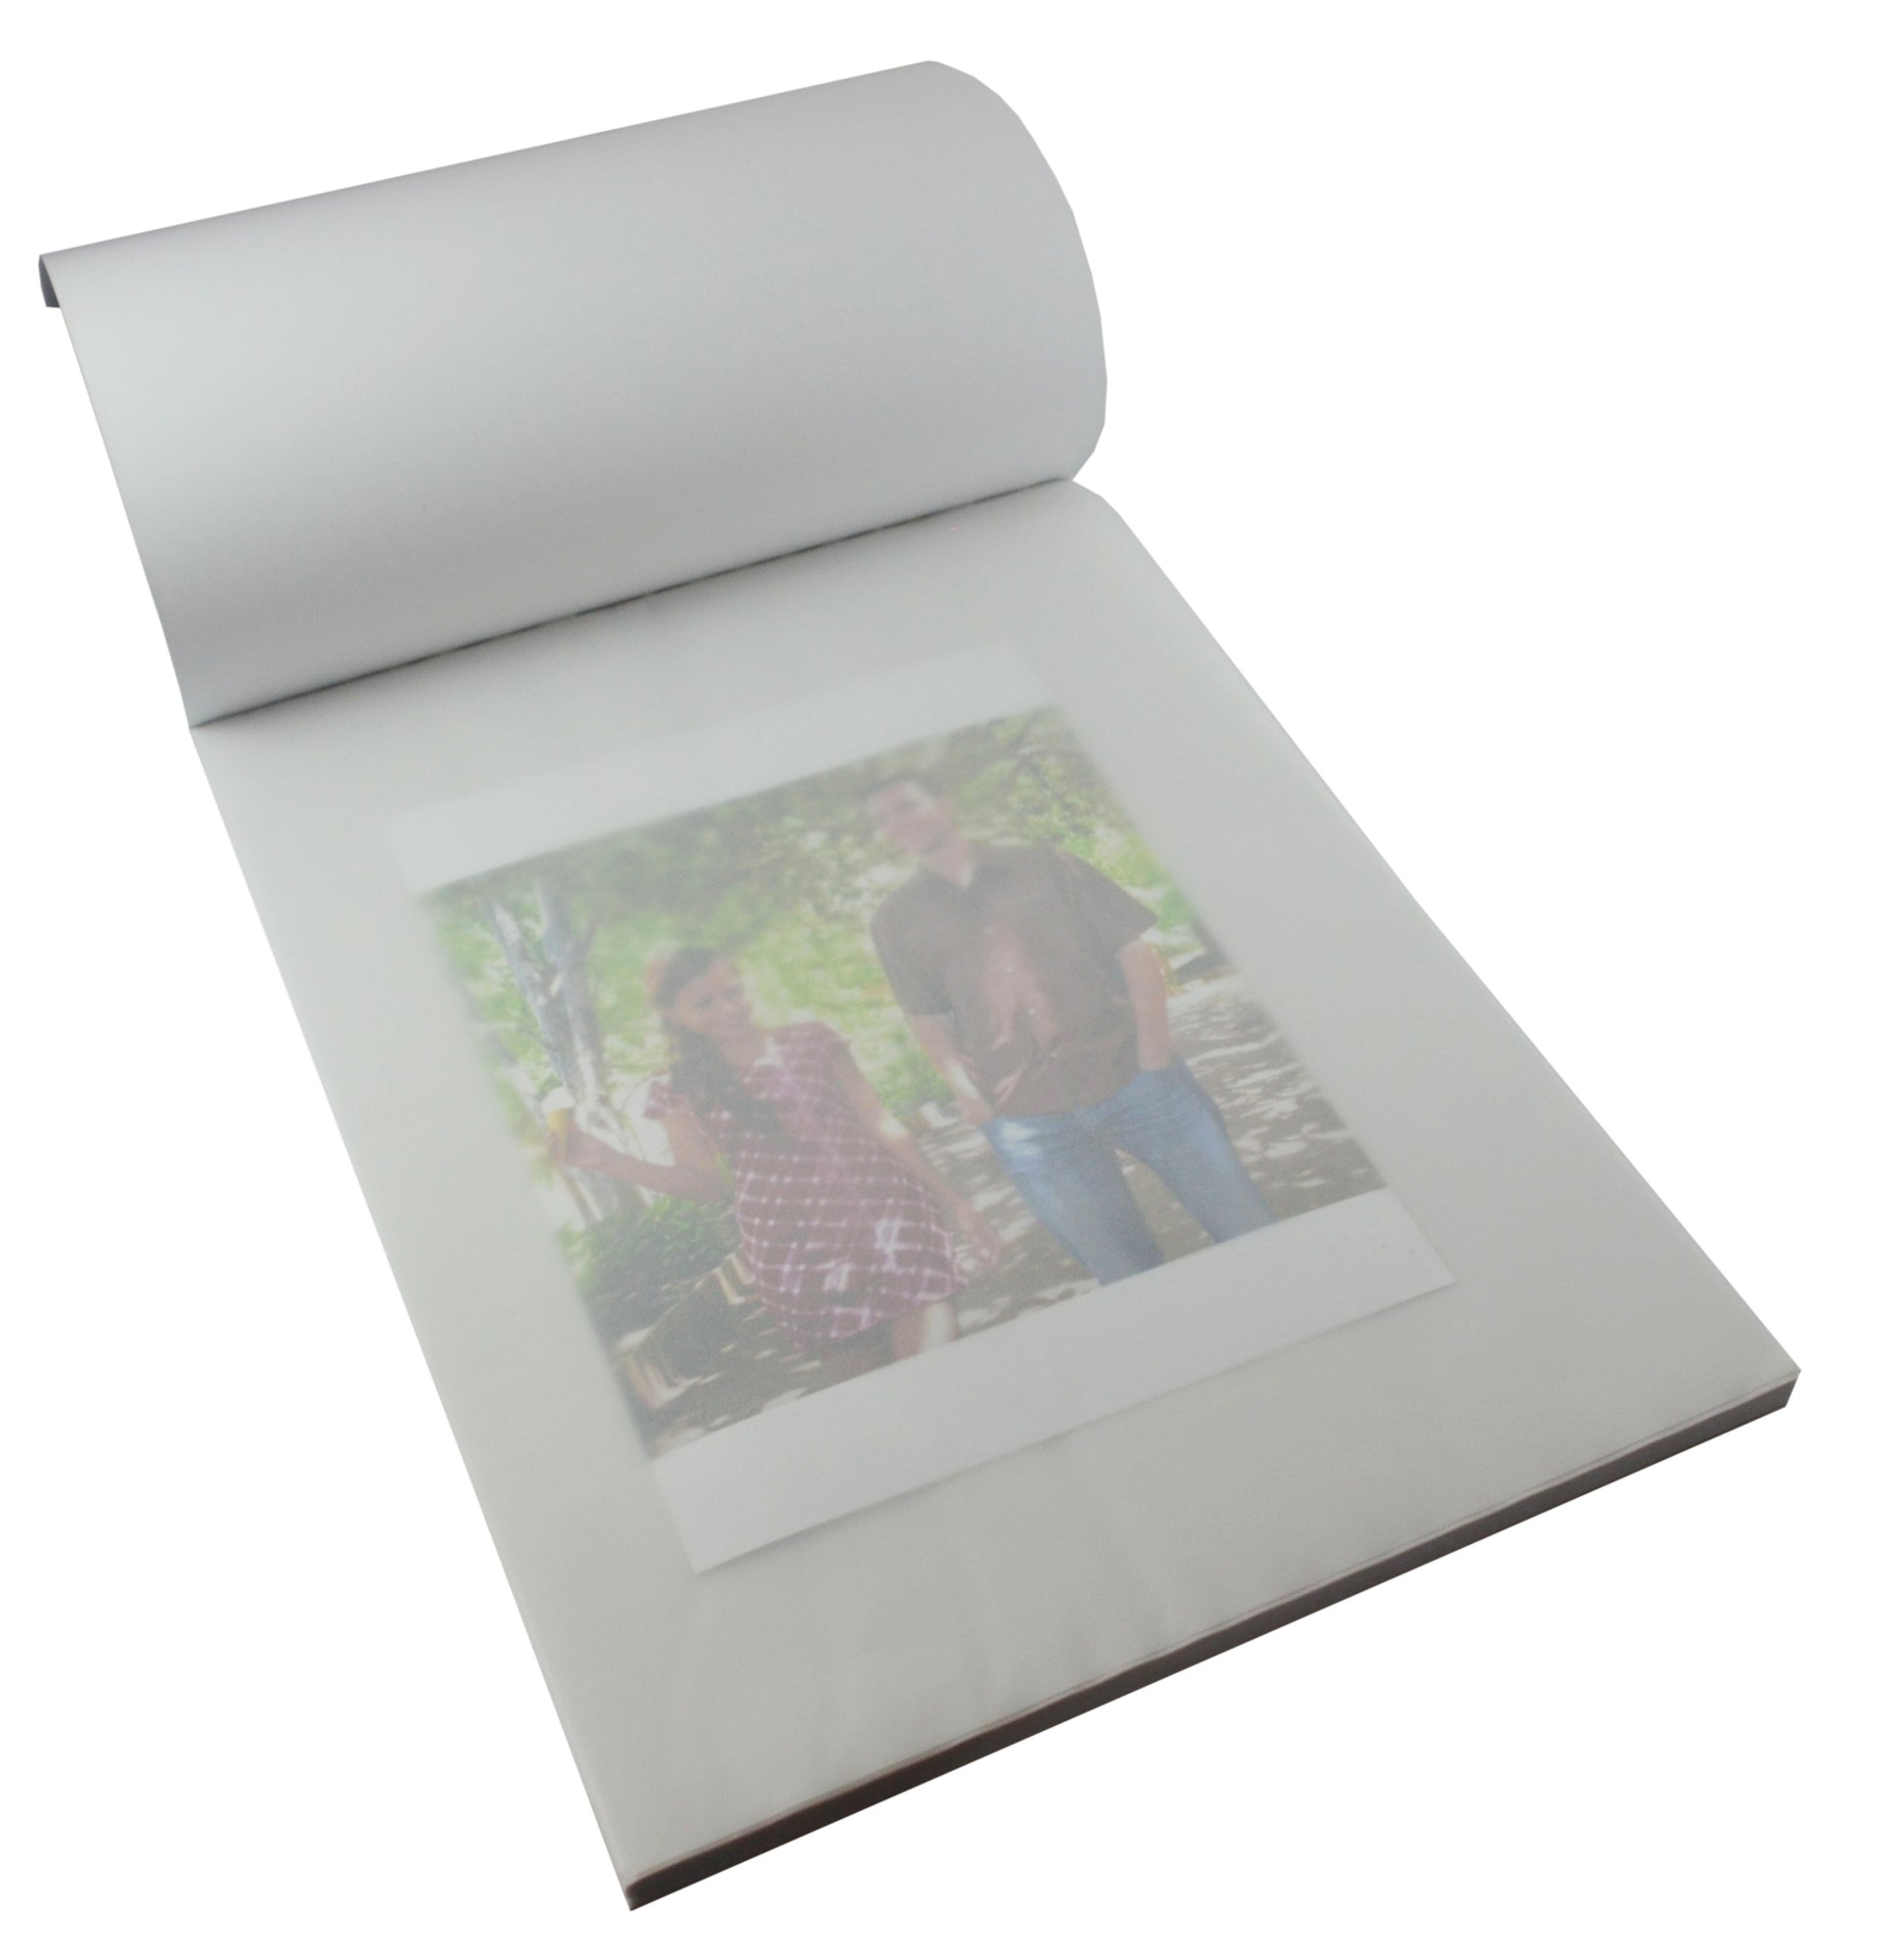 Graphite Transfer Paper, 18 x 24 - 10 Sheets - Black Waxed Paper